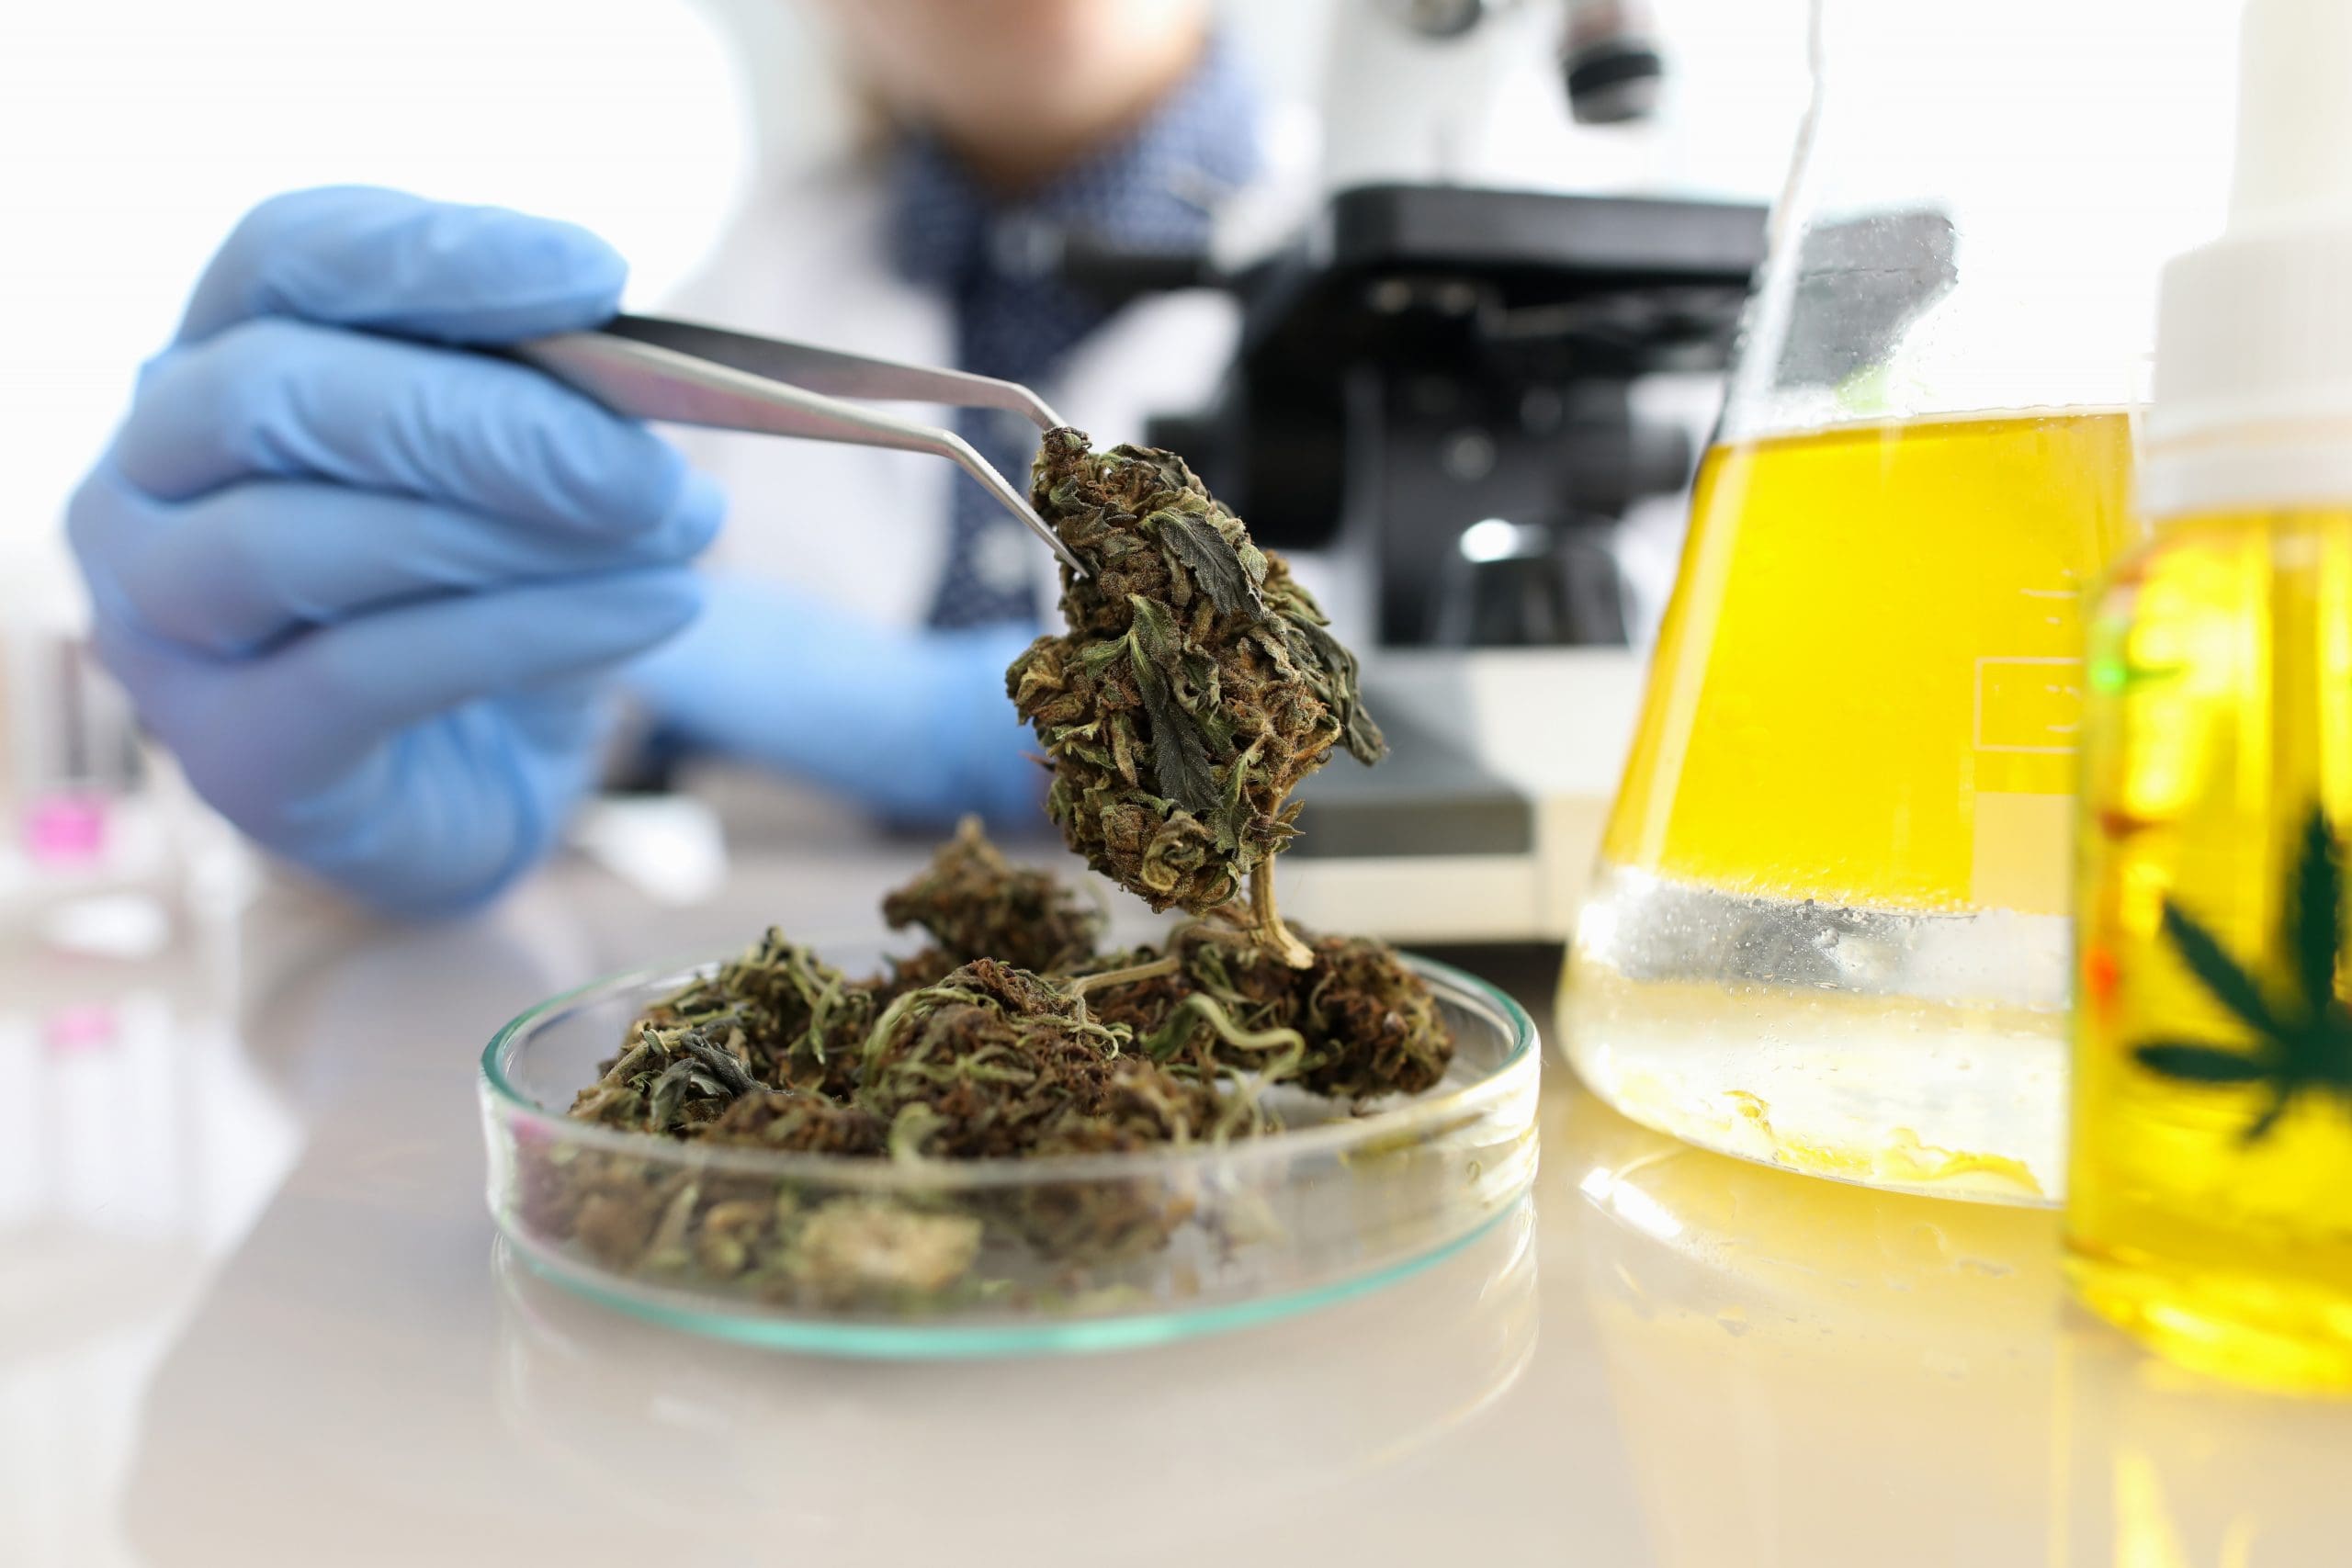 LIMS Software for the Cannabis Laboratory | LabLynx